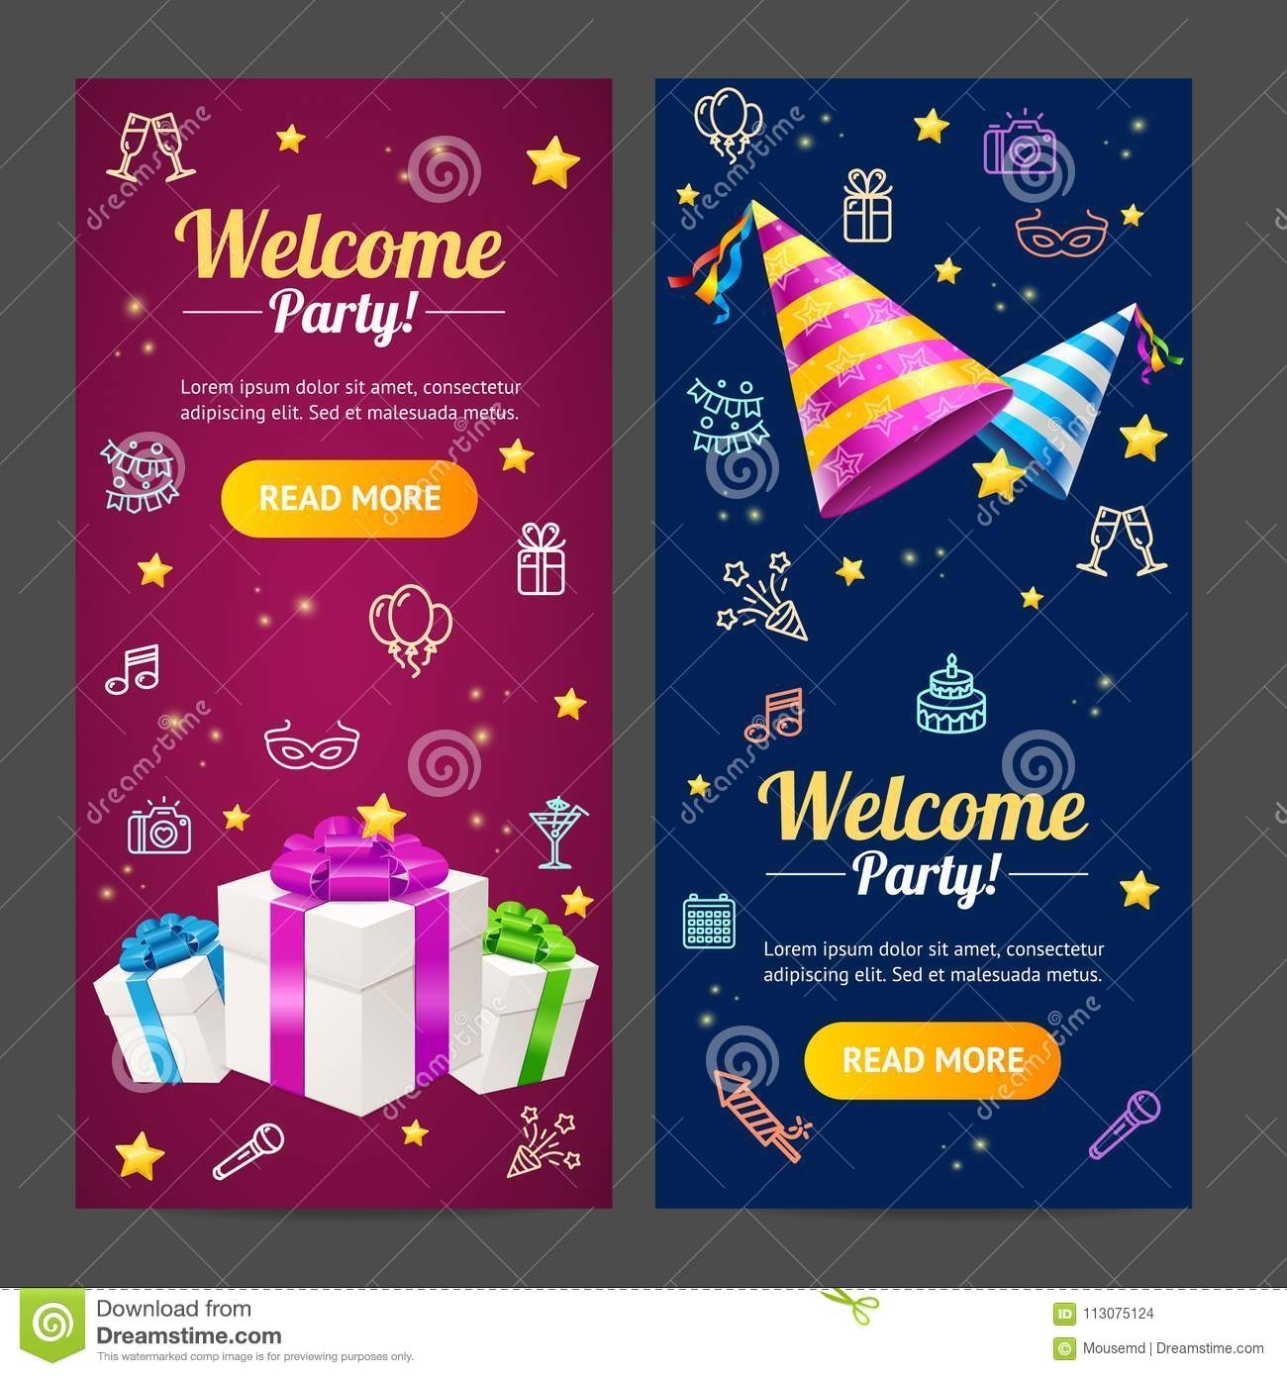 Welcome Party Template Card Vecrtical Set. Vector Stock Vector - Illustration Of Concept with Celebrate It Templates Place Cards